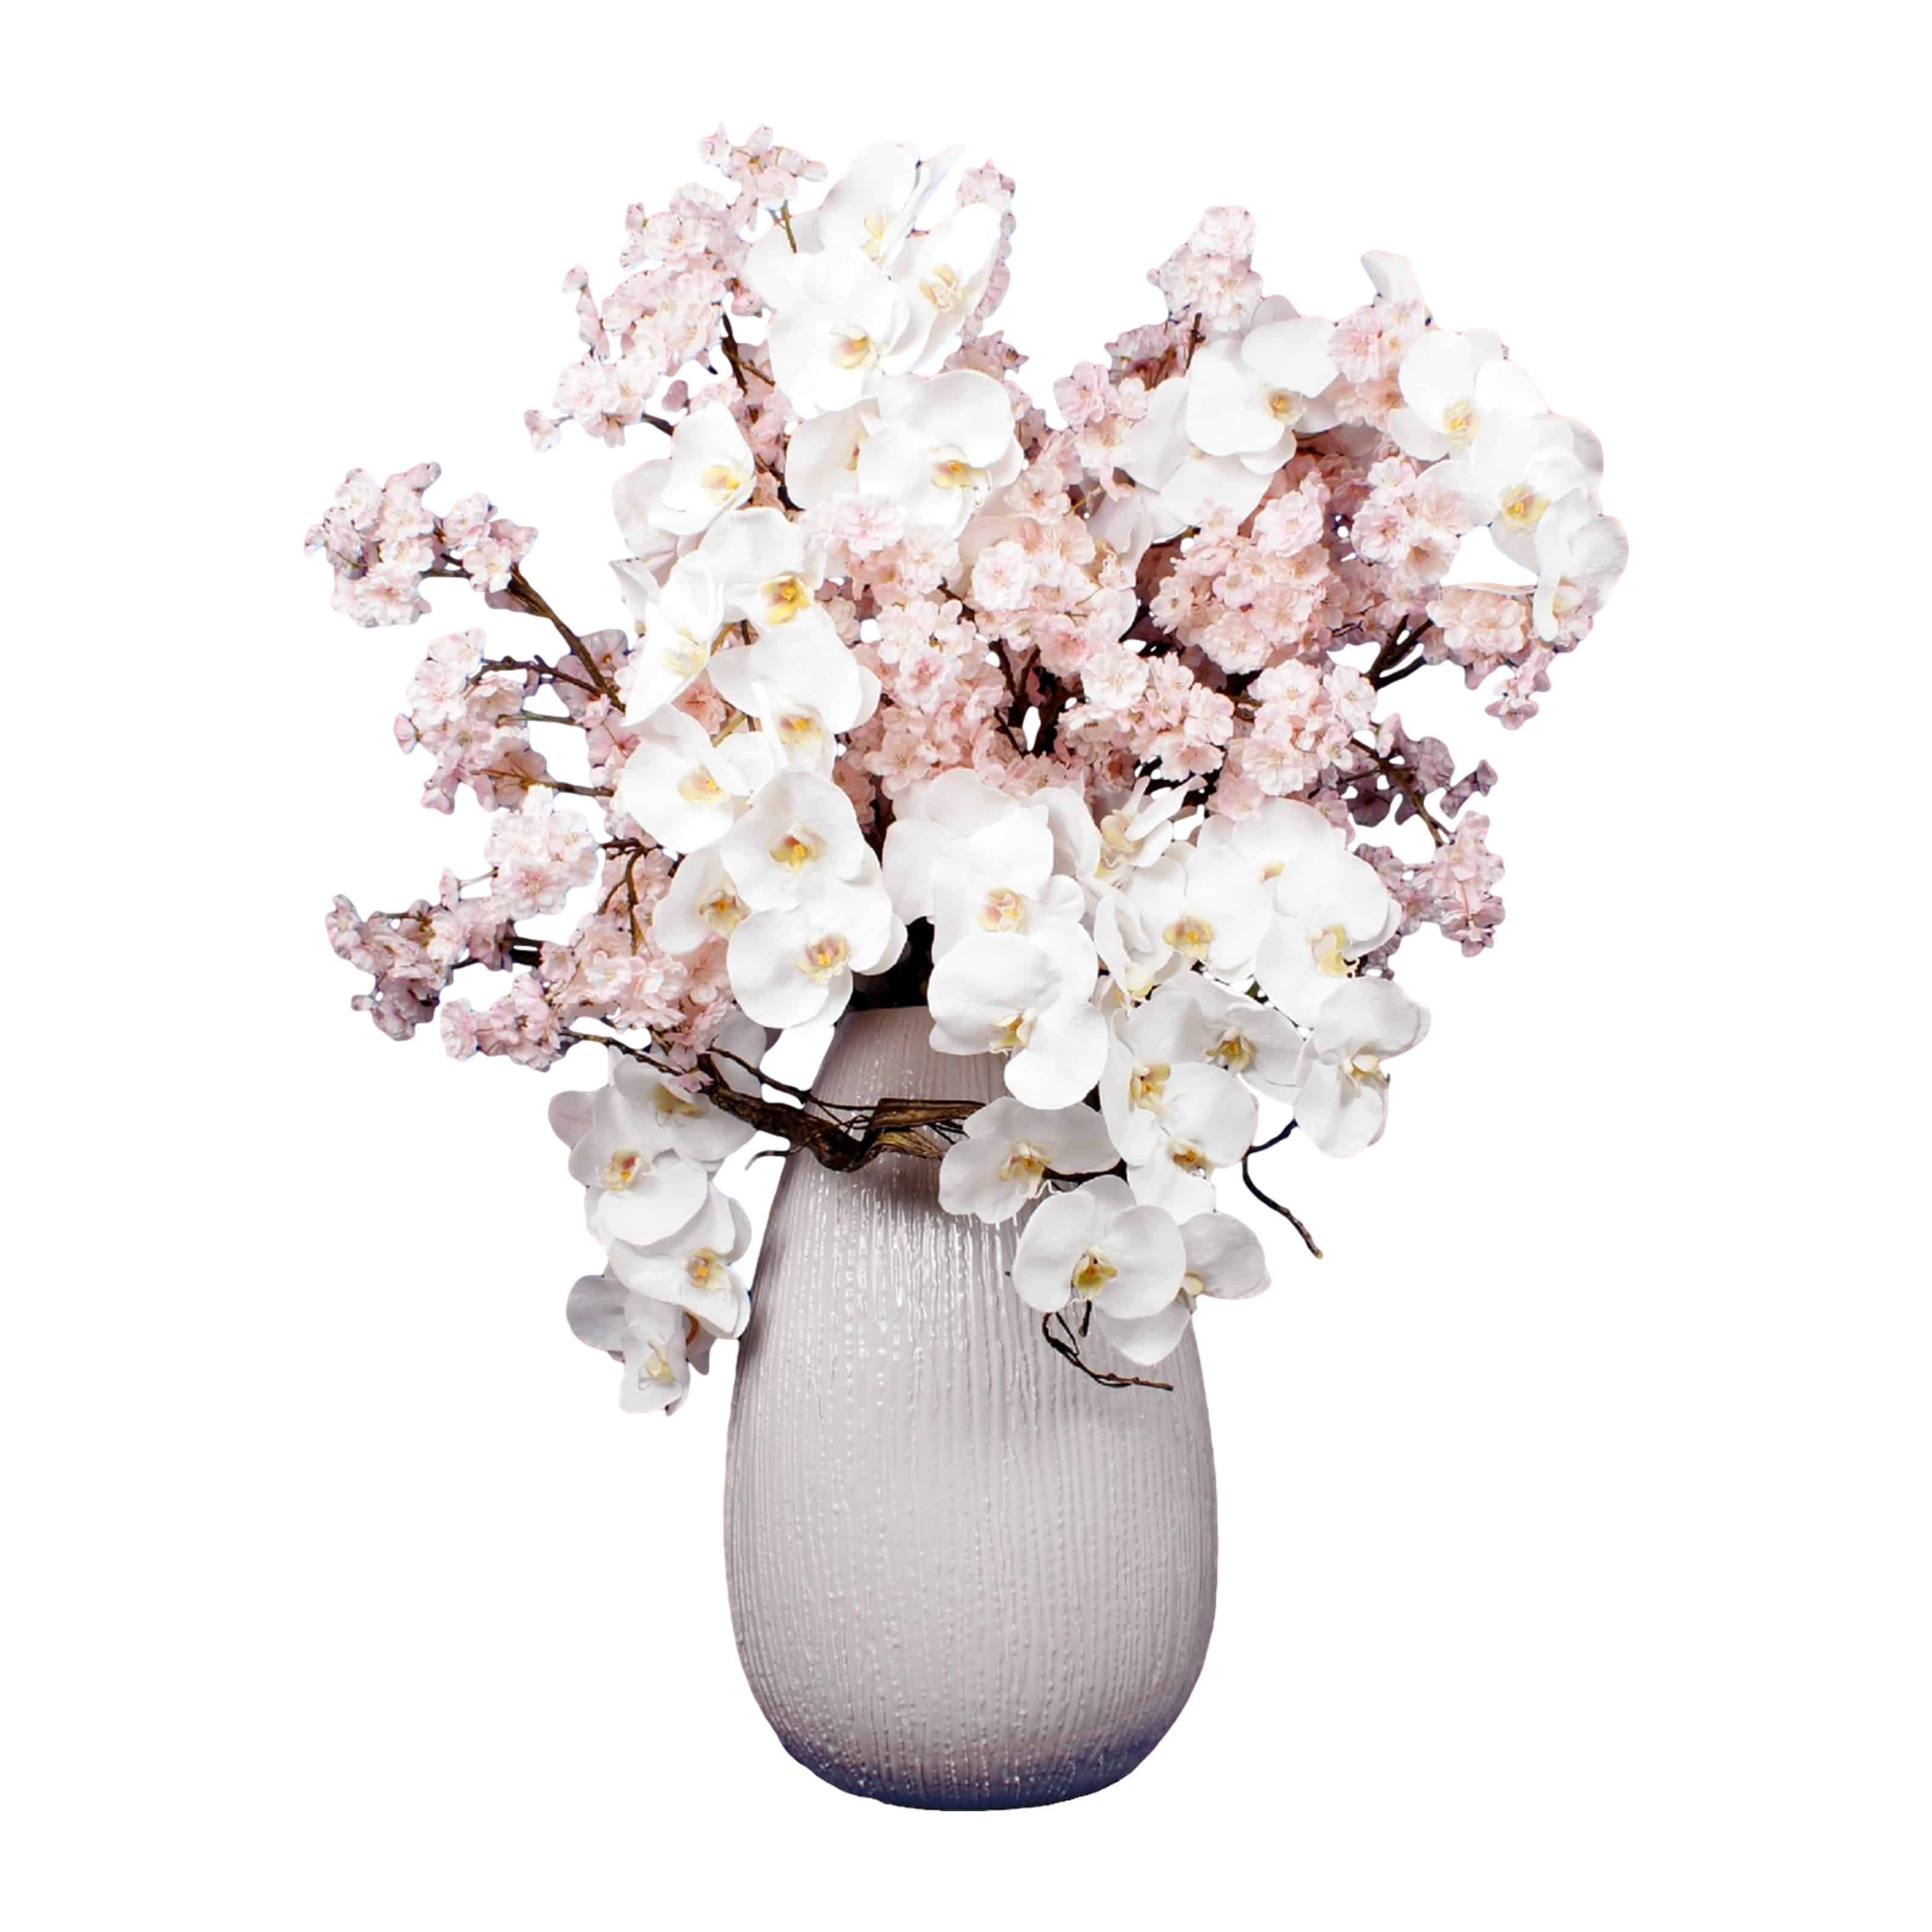 Buy our beautiful blossom and orchid faux arrangement. Clean and elegant